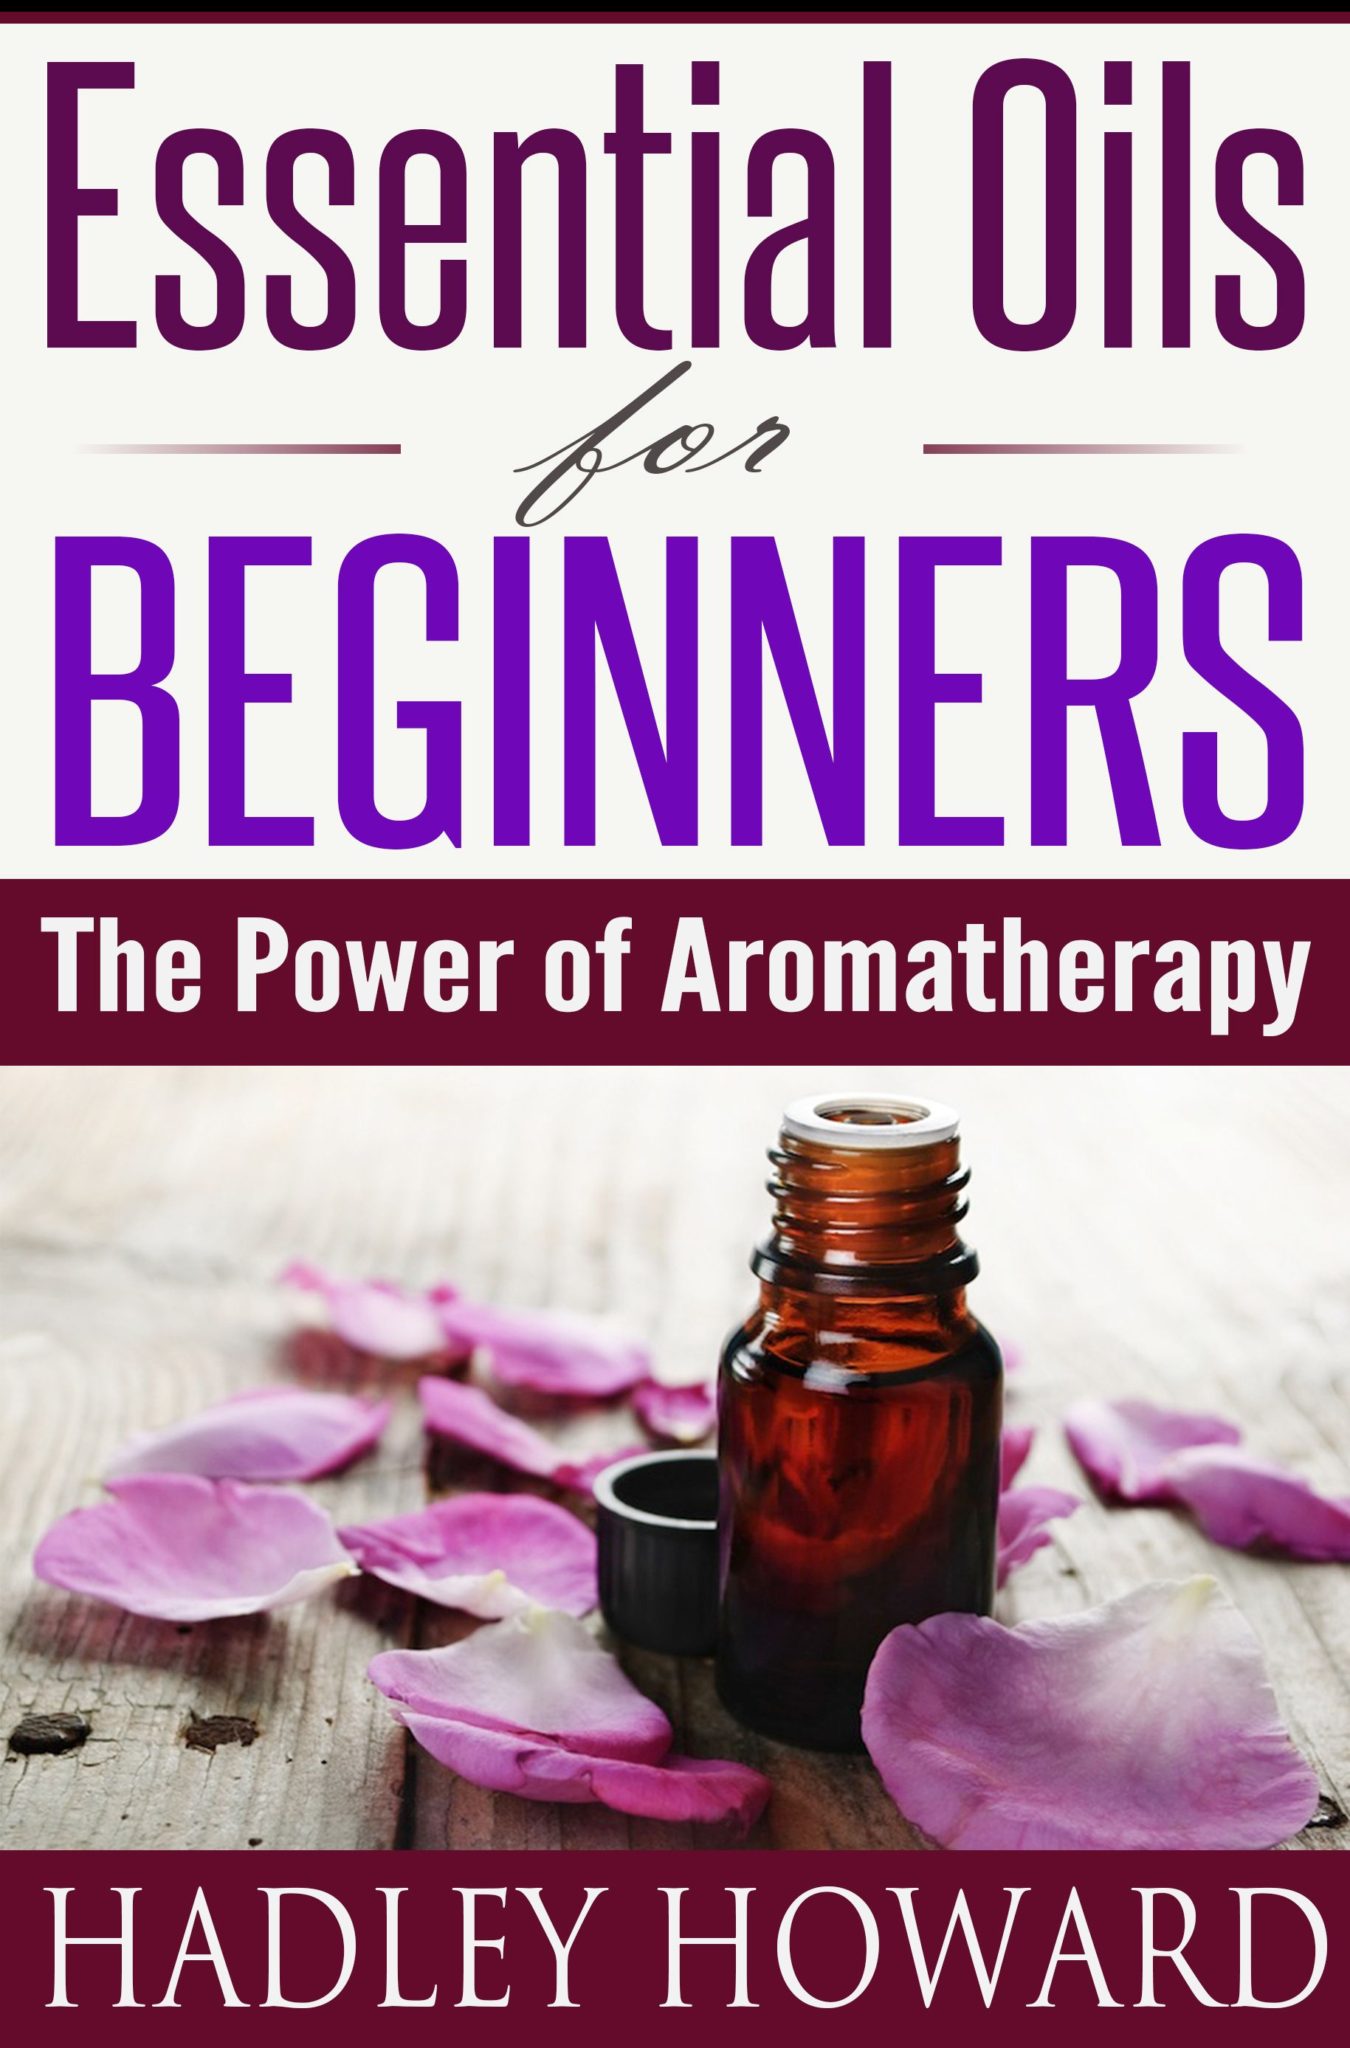 Essential Oils for Beginners – The Power of Aromatherapy by Hadley Howard